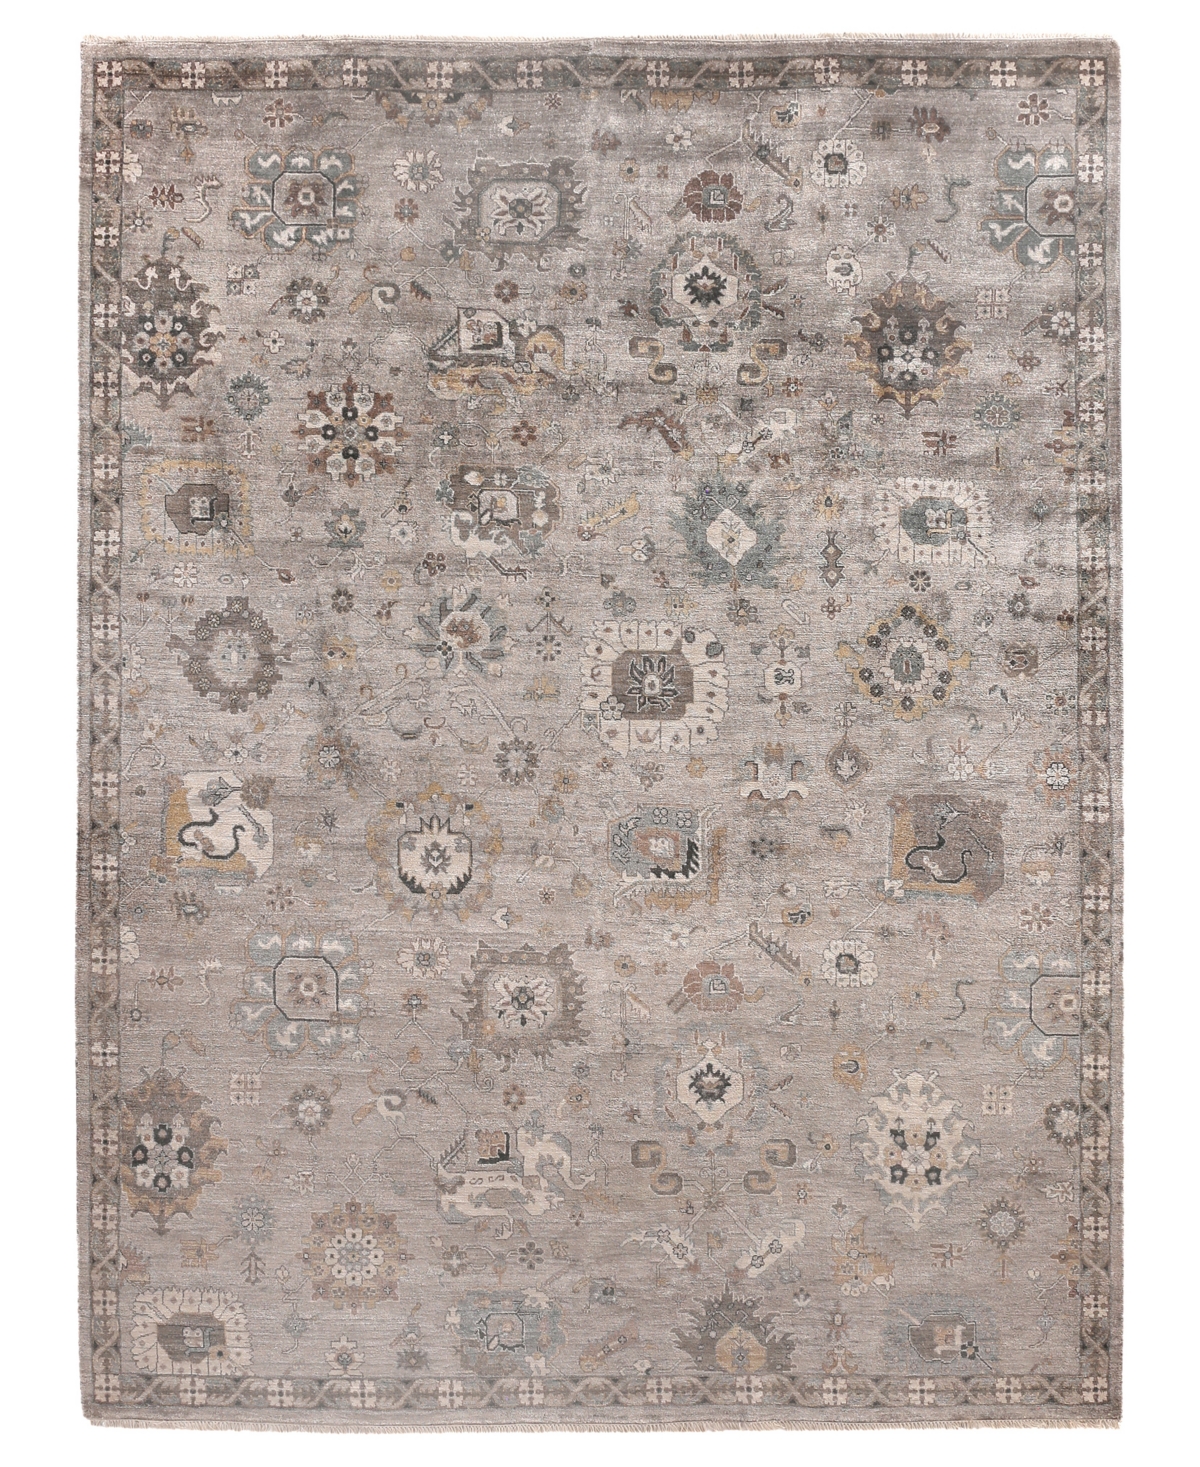 Exquisite Rugs Museum Er5198 8' X 10' Area Rug In Silver Tone